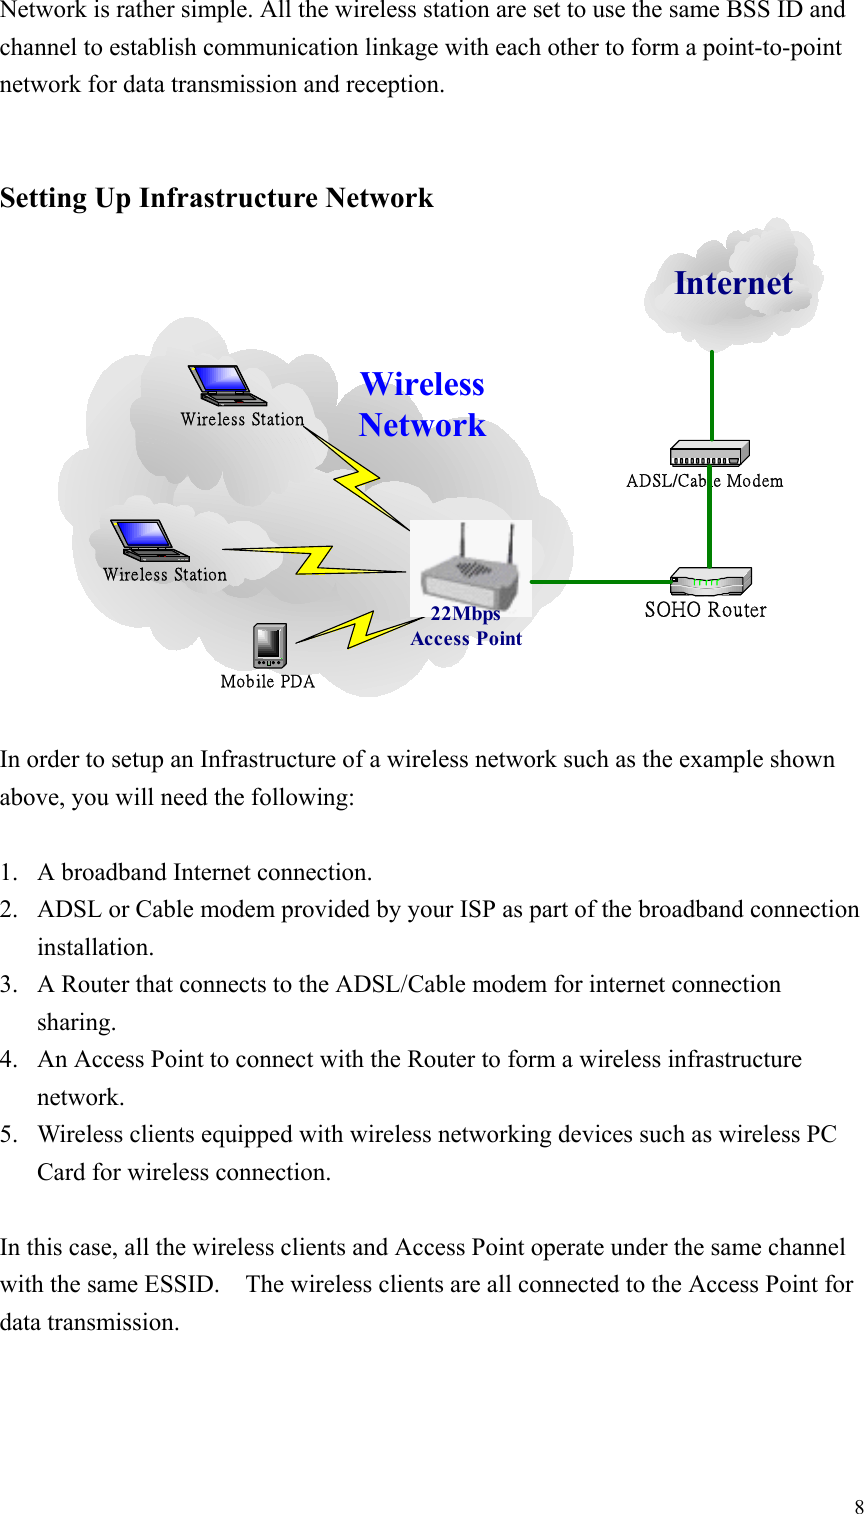 8Network is rather simple. All the wireless station are set to use the same BSS ID andchannel to establish communication linkage with each other to form a point-to-pointnetwork for data transmission and reception.Setting Up Infrastructure NetworkIn order to setup an Infrastructure of a wireless network such as the example shownabove, you will need the following:1. A broadband Internet connection.2. ADSL or Cable modem provided by your ISP as part of the broadband connectioninstallation.3. A Router that connects to the ADSL/Cable modem for internet connectionsharing.4. An Access Point to connect with the Router to form a wireless infrastructurenetwork.5. Wireless clients equipped with wireless networking devices such as wireless PCCard for wireless connection.In this case, all the wireless clients and Access Point operate under the same channelwith the same ESSID.    The wireless clients are all connected to the Access Point fordata transmission.InternetADSL/Cable ModemSOHO RouterWireless StationWireless StationMobile PDA22MbpsAccess PointWirelessNetwork